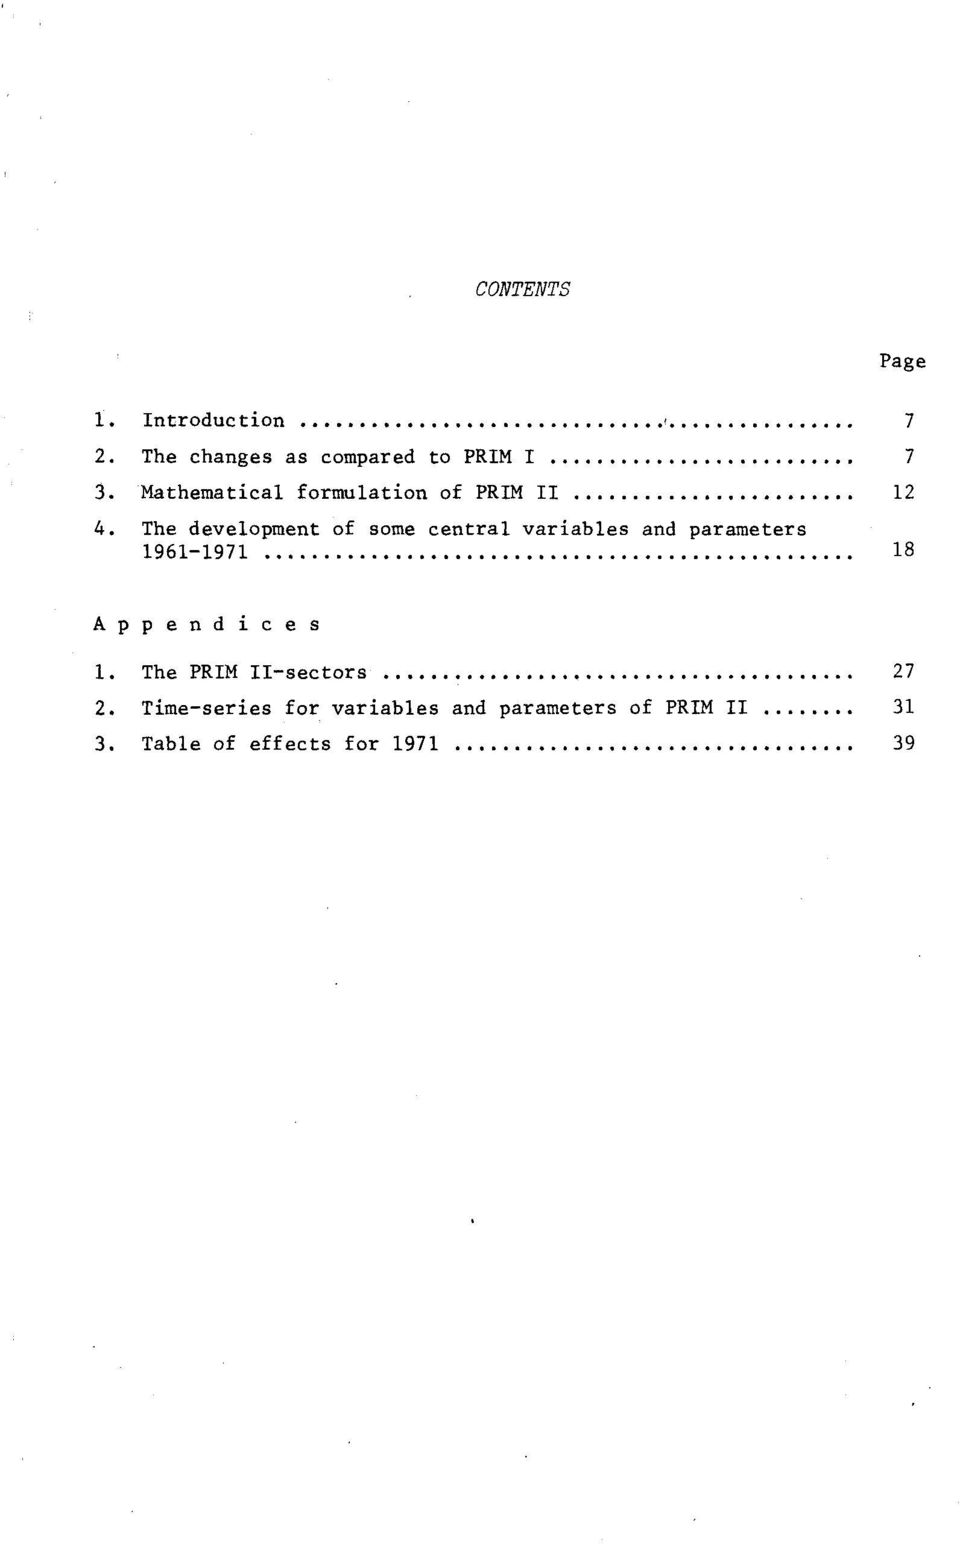 variables and parameters 1961-1971 18 Appendices 1 The PRIM II-sectors 27 2